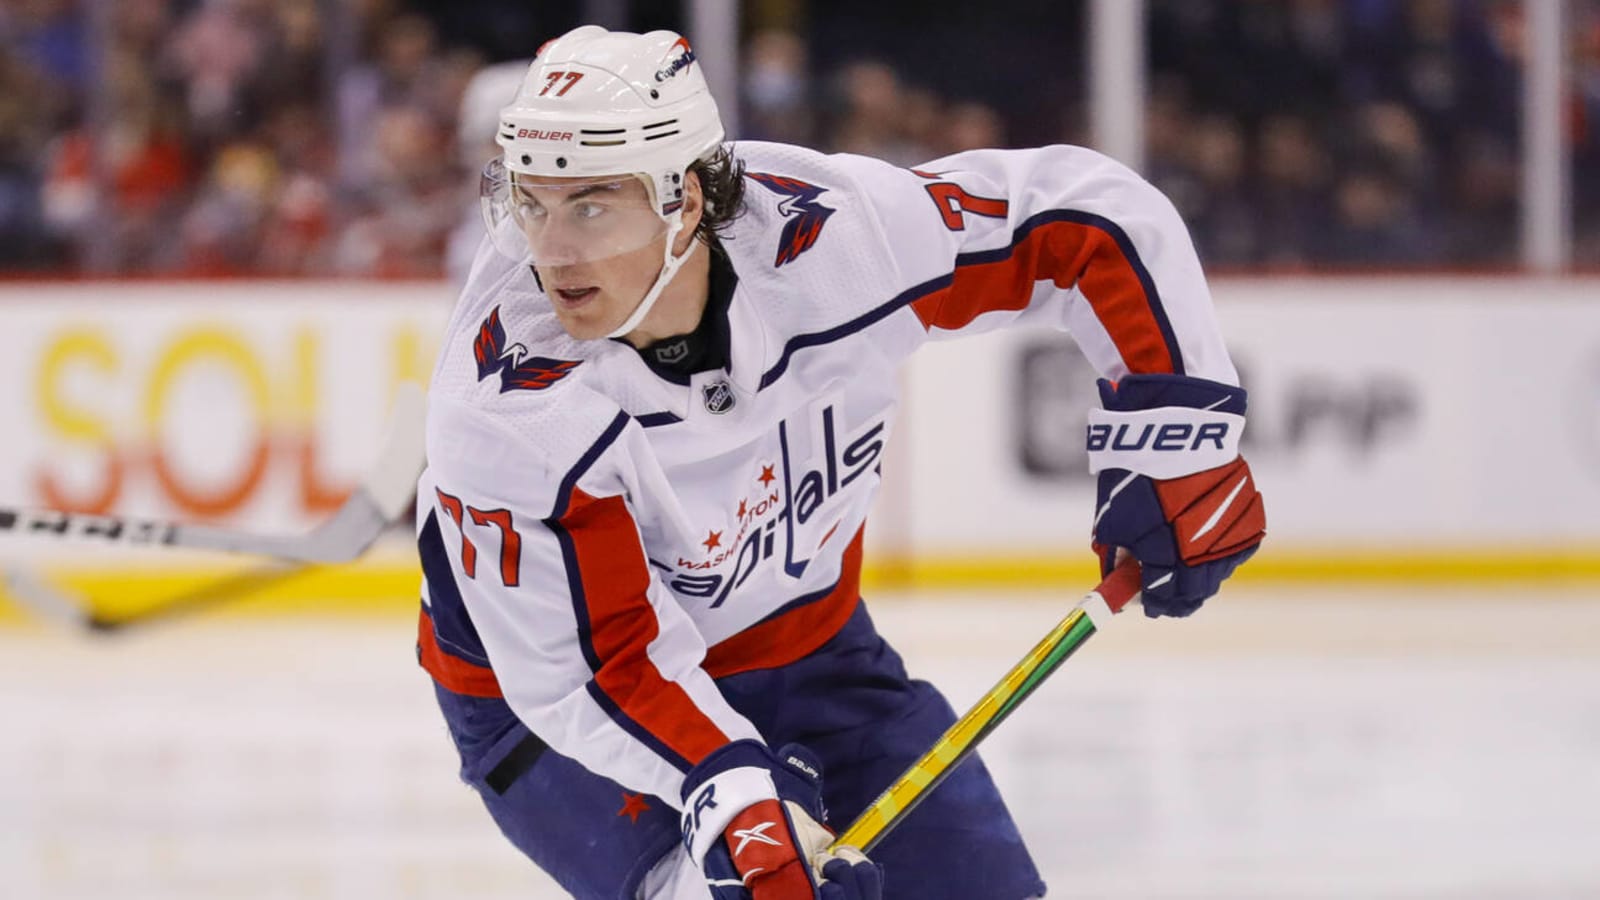 Capitals forward T.J. Oshie out indefinitely with lower-body injury